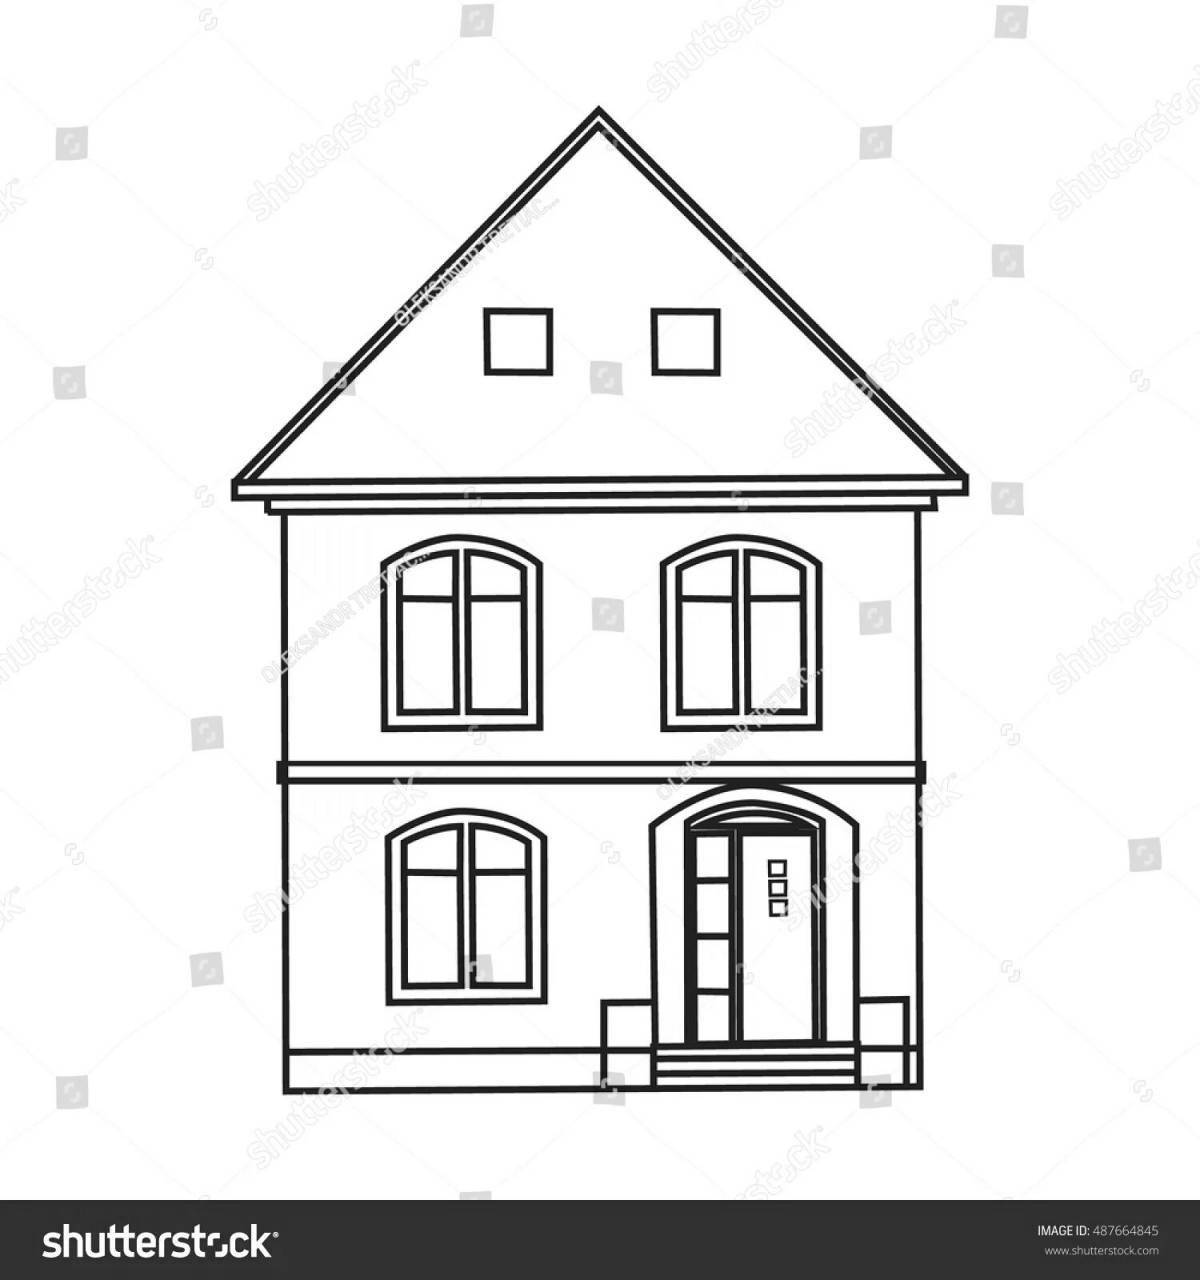 Coloring artistic two-story house